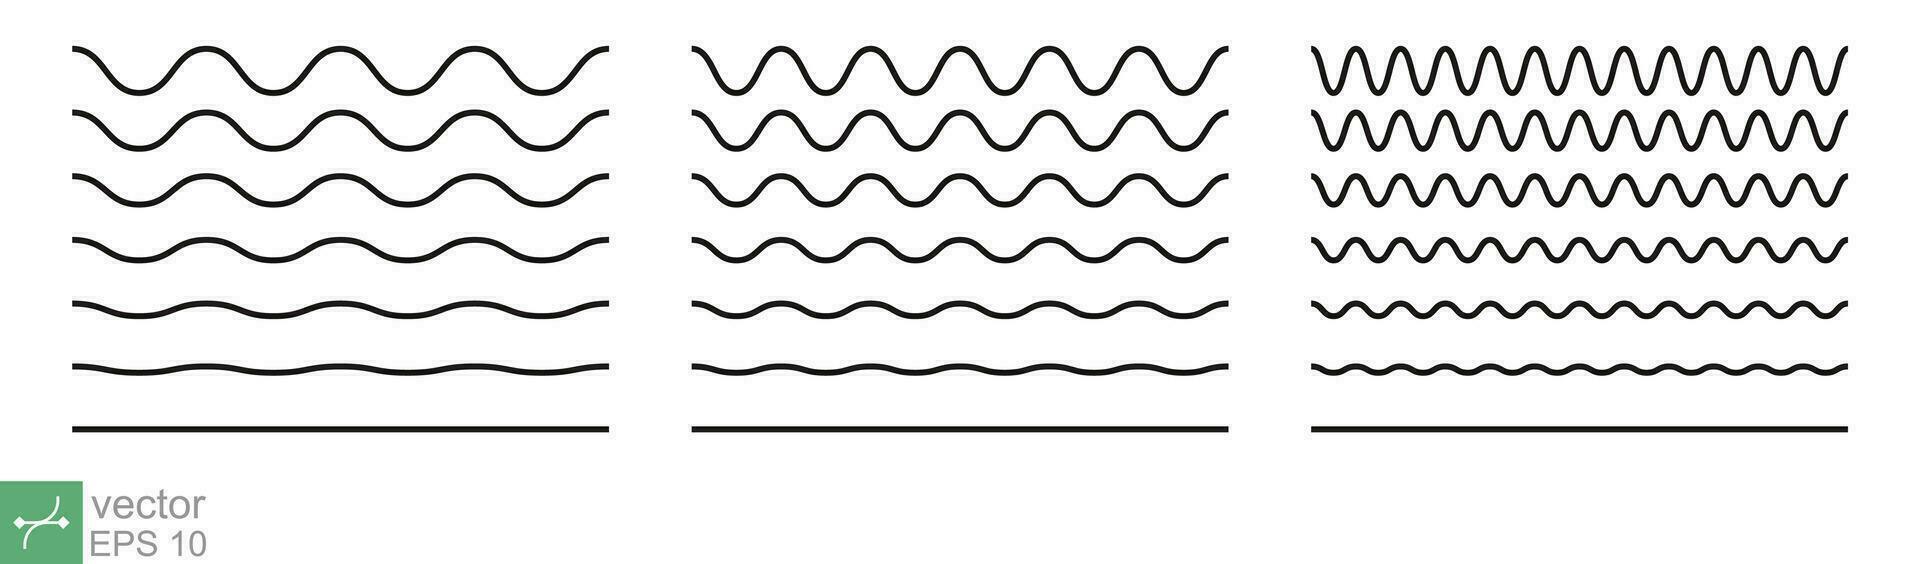 Squiggle, zigzag line pattern. Wiggly, wavy, ripple, wave line, black underlines, smooth and squiggly horizontal curvy squiggles. Vector illustration isolated on white background. EPS 10.